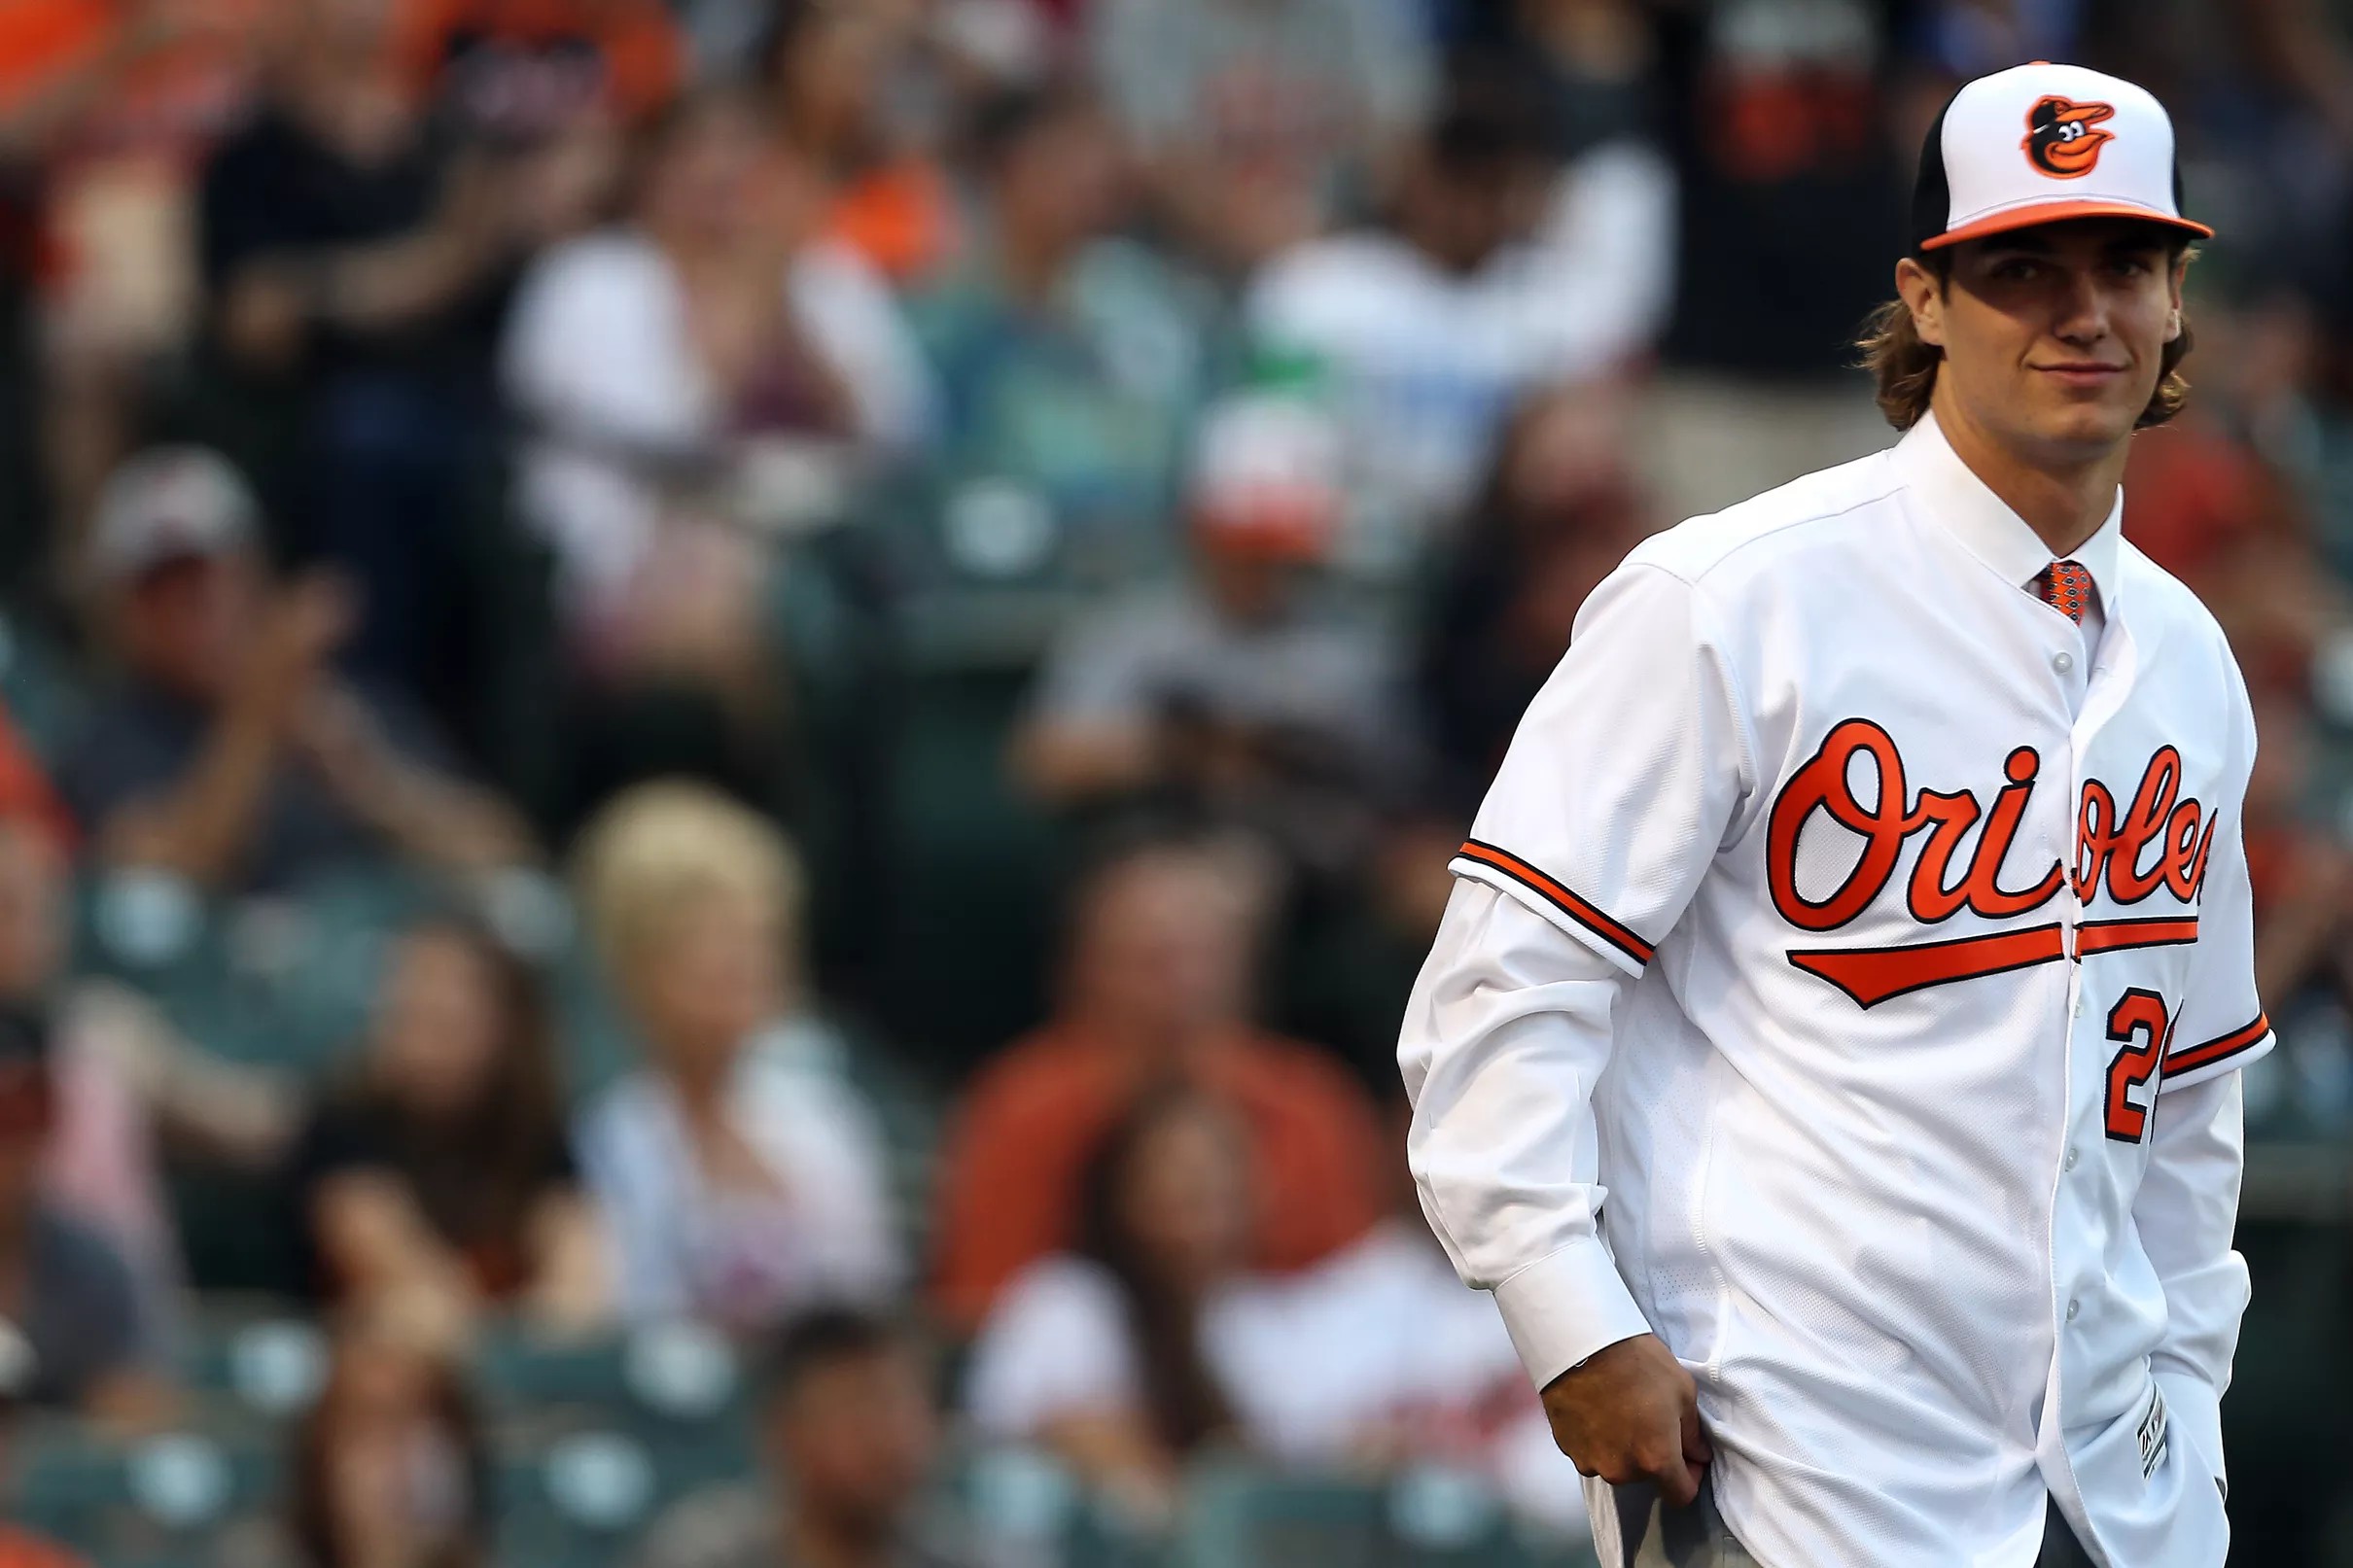 The Orioles added four players to the 40man roster yesterday to